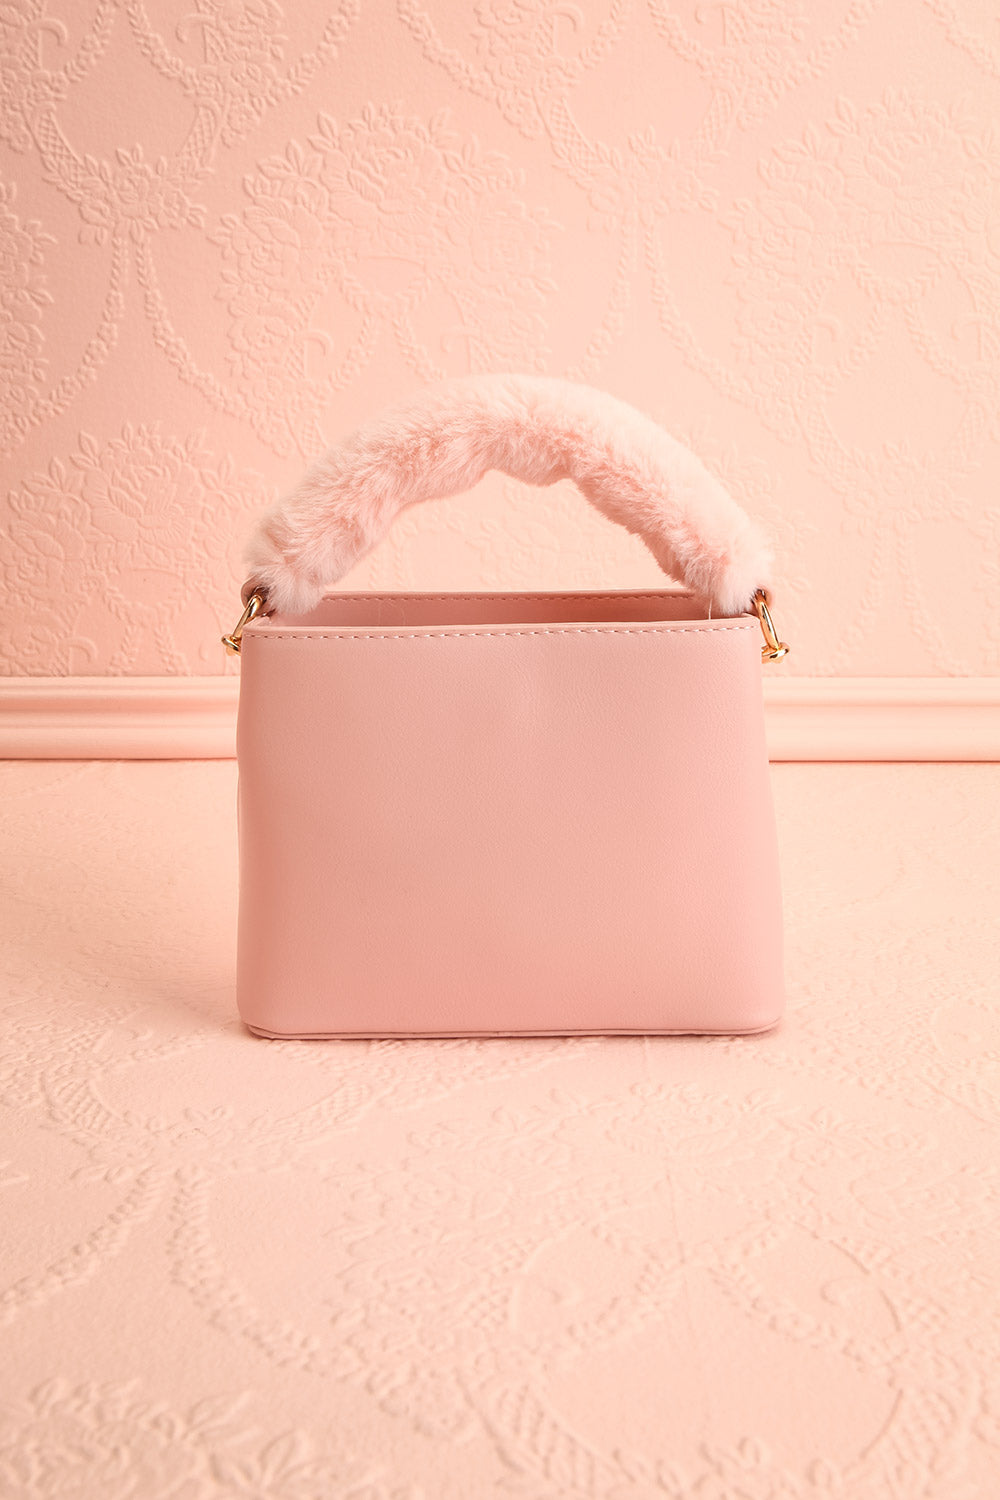 Deliah Pink Small Handbag w/ Fluffy Handle | Boutique 1861 front view